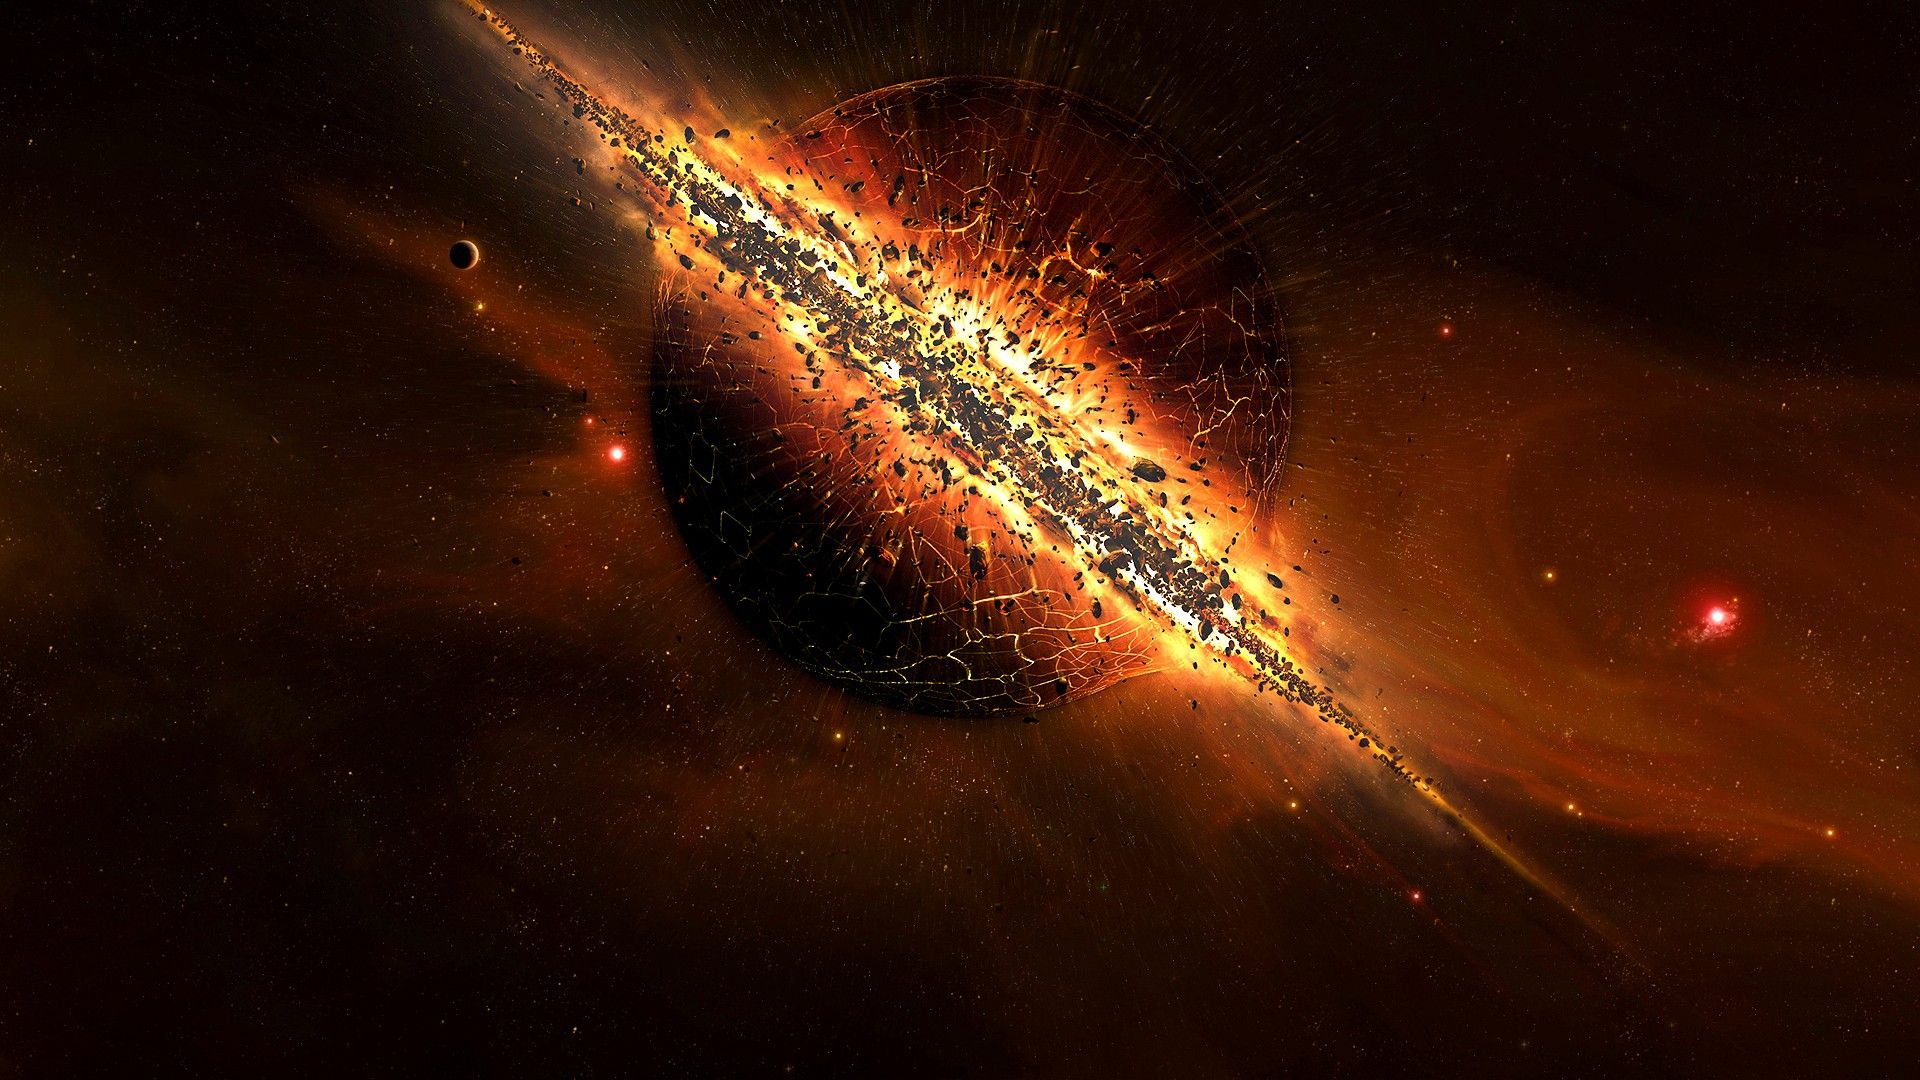 outer space, stars, planets, digital art, explosion wallpaper